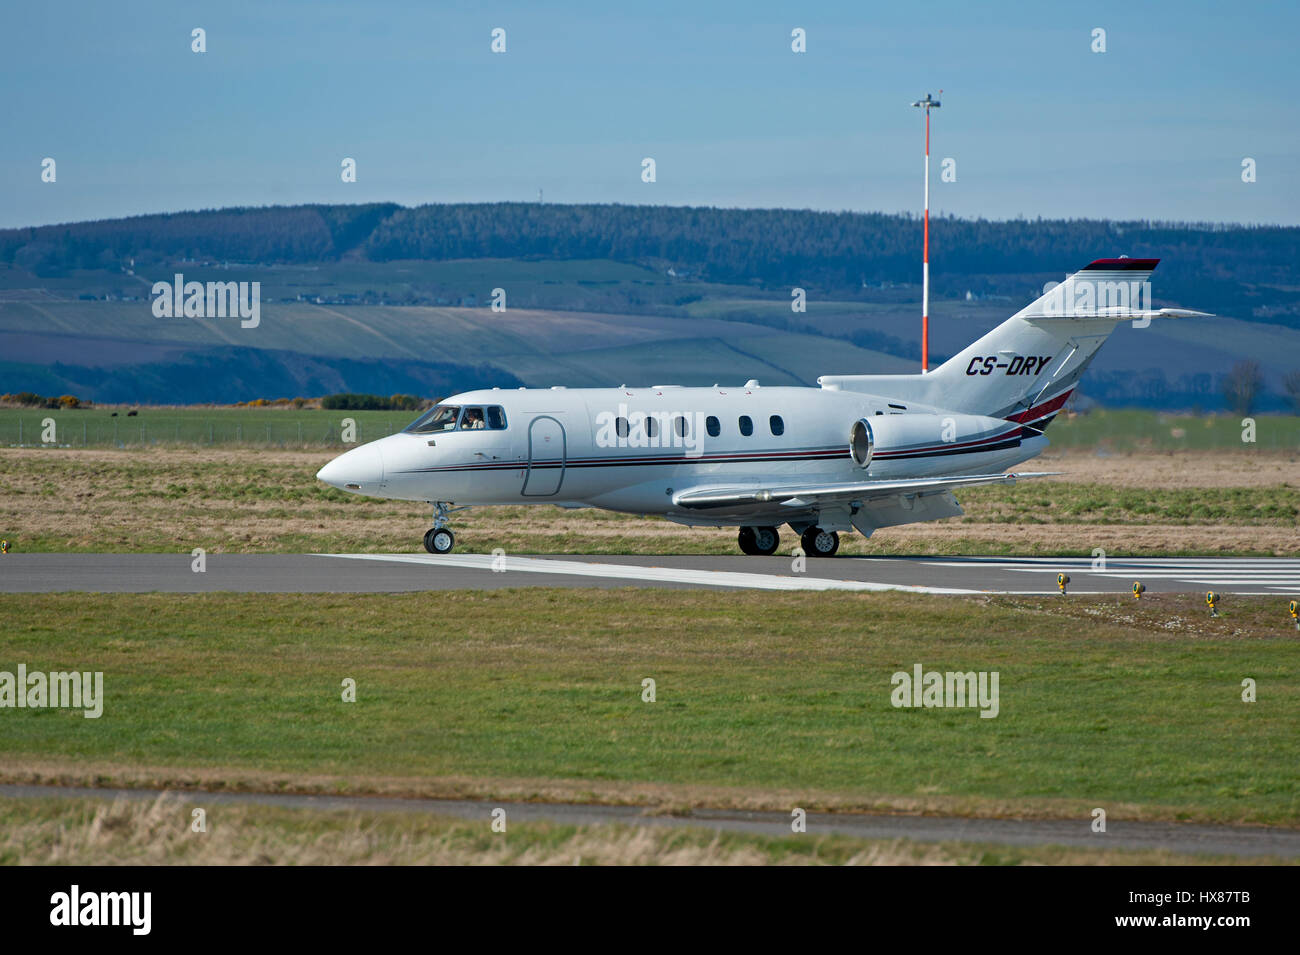 A BAe 125 800XP Civil Jet arriving at Inverness Dalcross Airport in Highland Region Scotland. Stock Photo